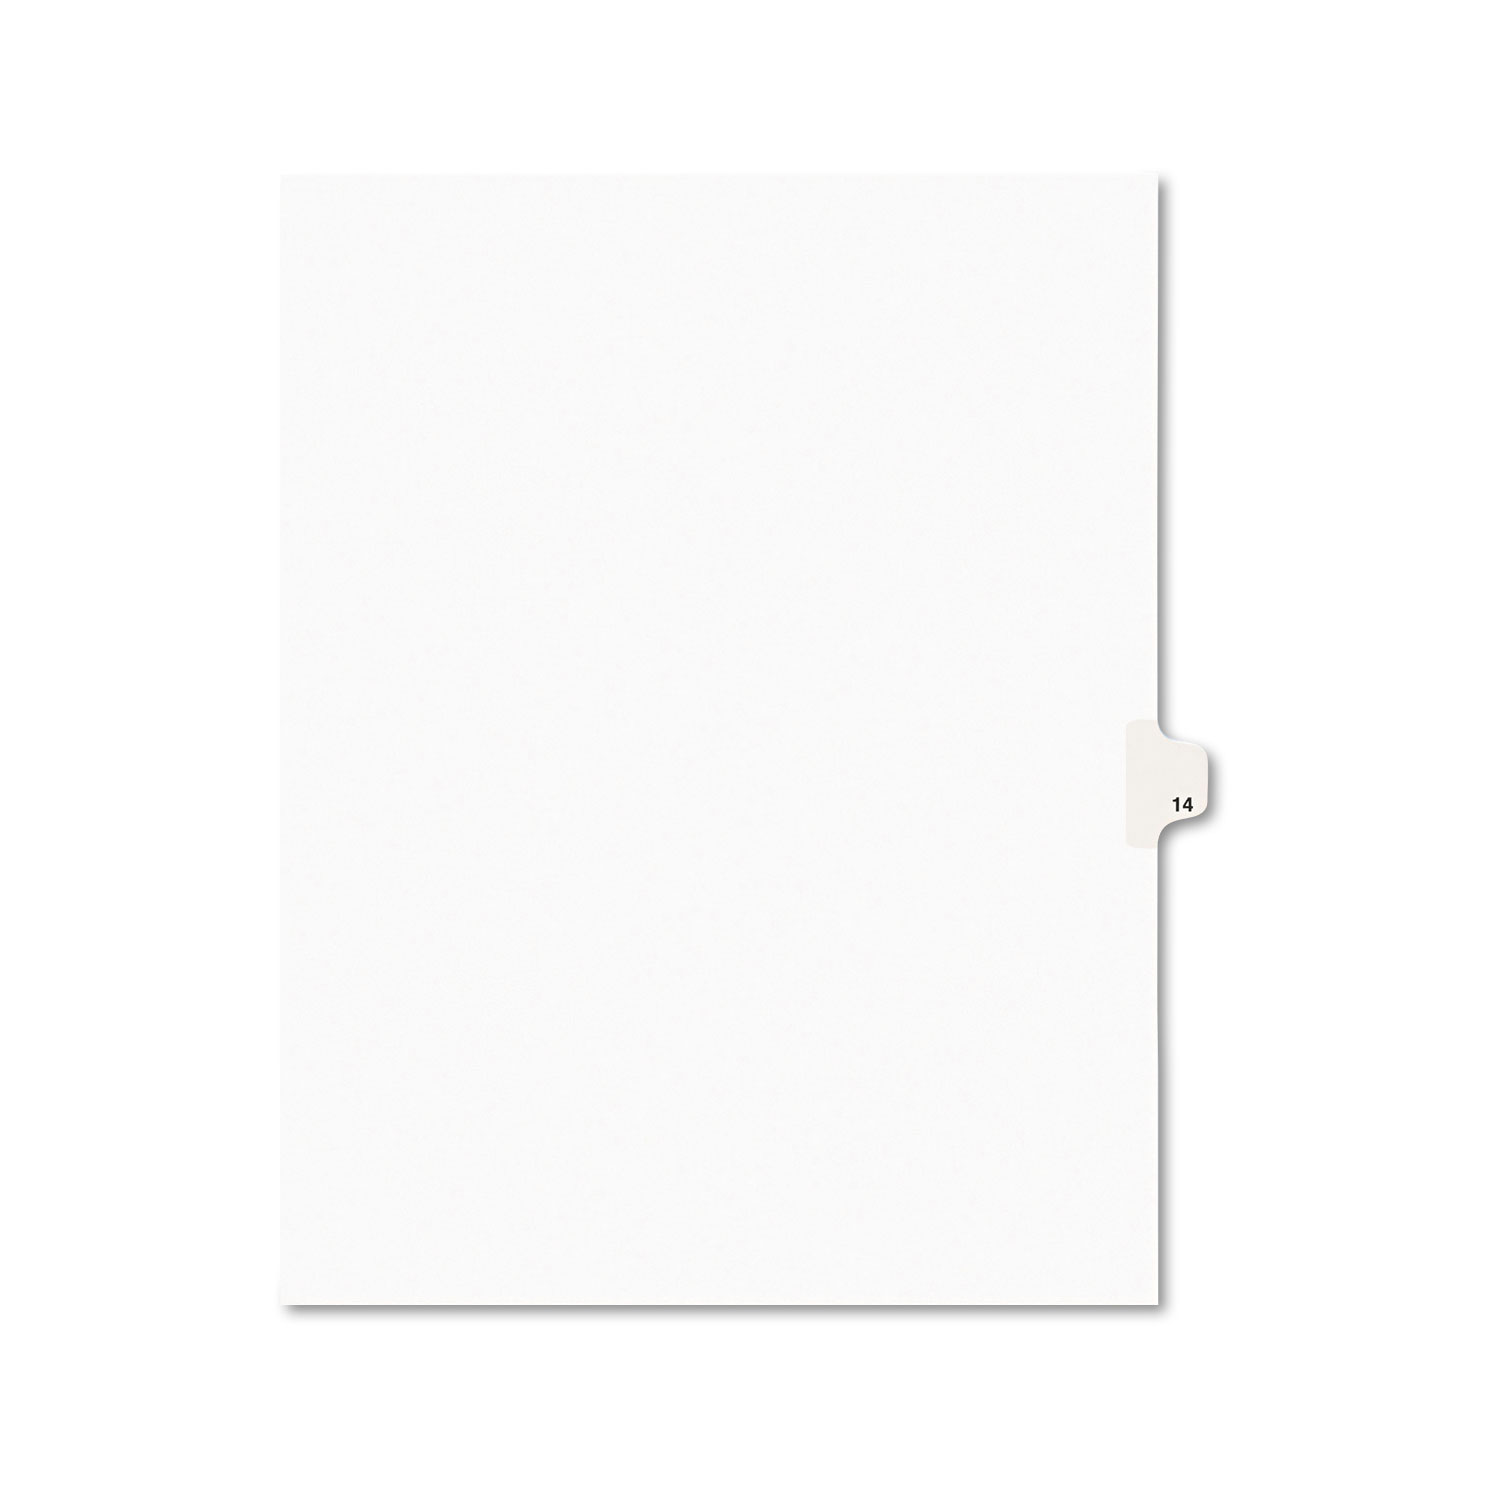  Avery 11924 Preprinted Legal Exhibit Side Tab Index Dividers, Avery Style, 10-Tab, 14, 11 x 8.5, White, 25/Pack (AVE11924) 